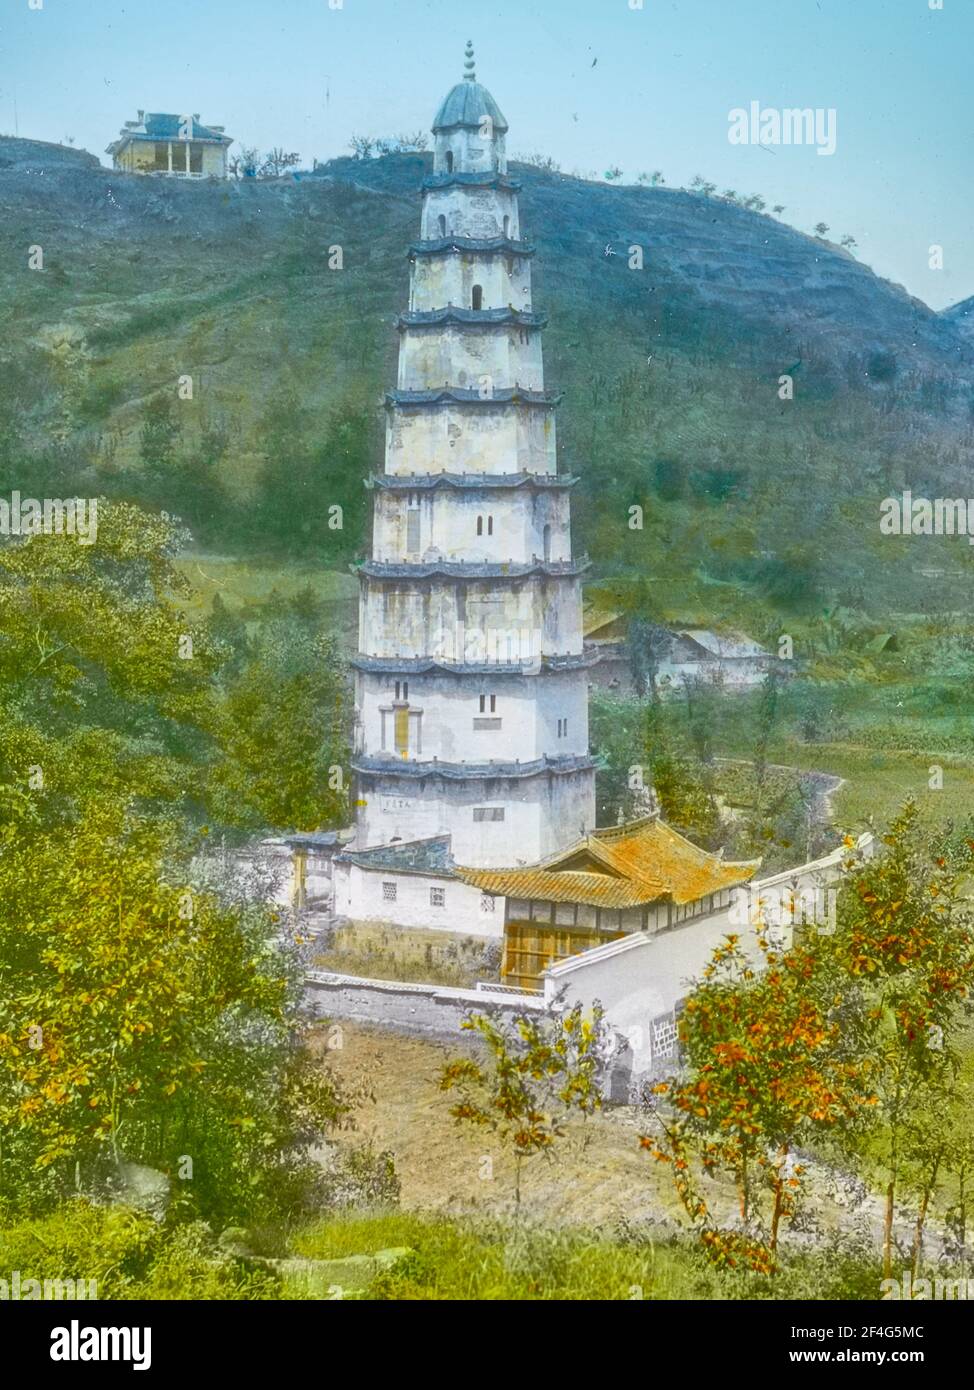 High-angle shot of a walled, ten-story pagoda, with a building on a hill in the background, Chongqing, China, 1917. From the Sidney D. Gamble photographs collection. () Stock Photo